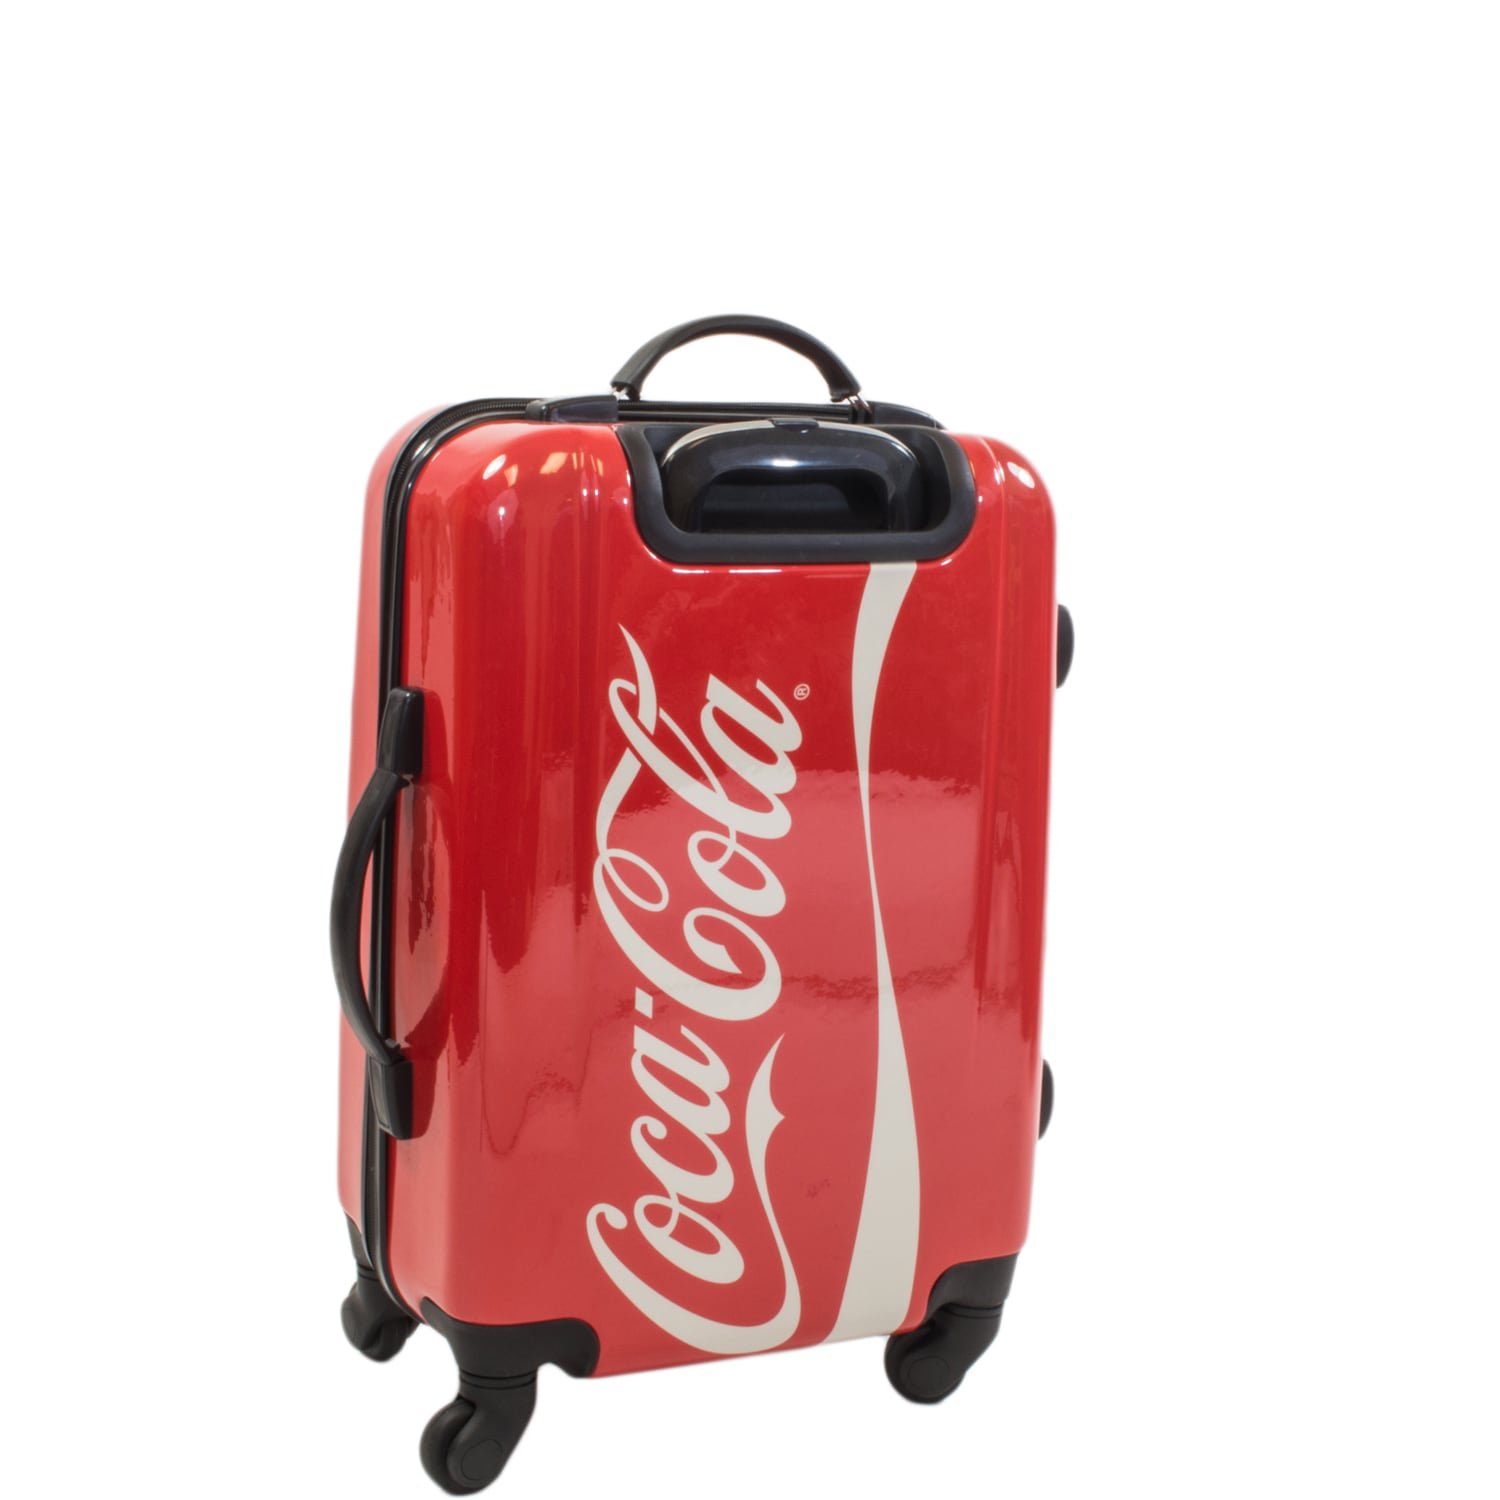 Buy Mother Lode Carry-On Rolling Duffel for USD 229.99